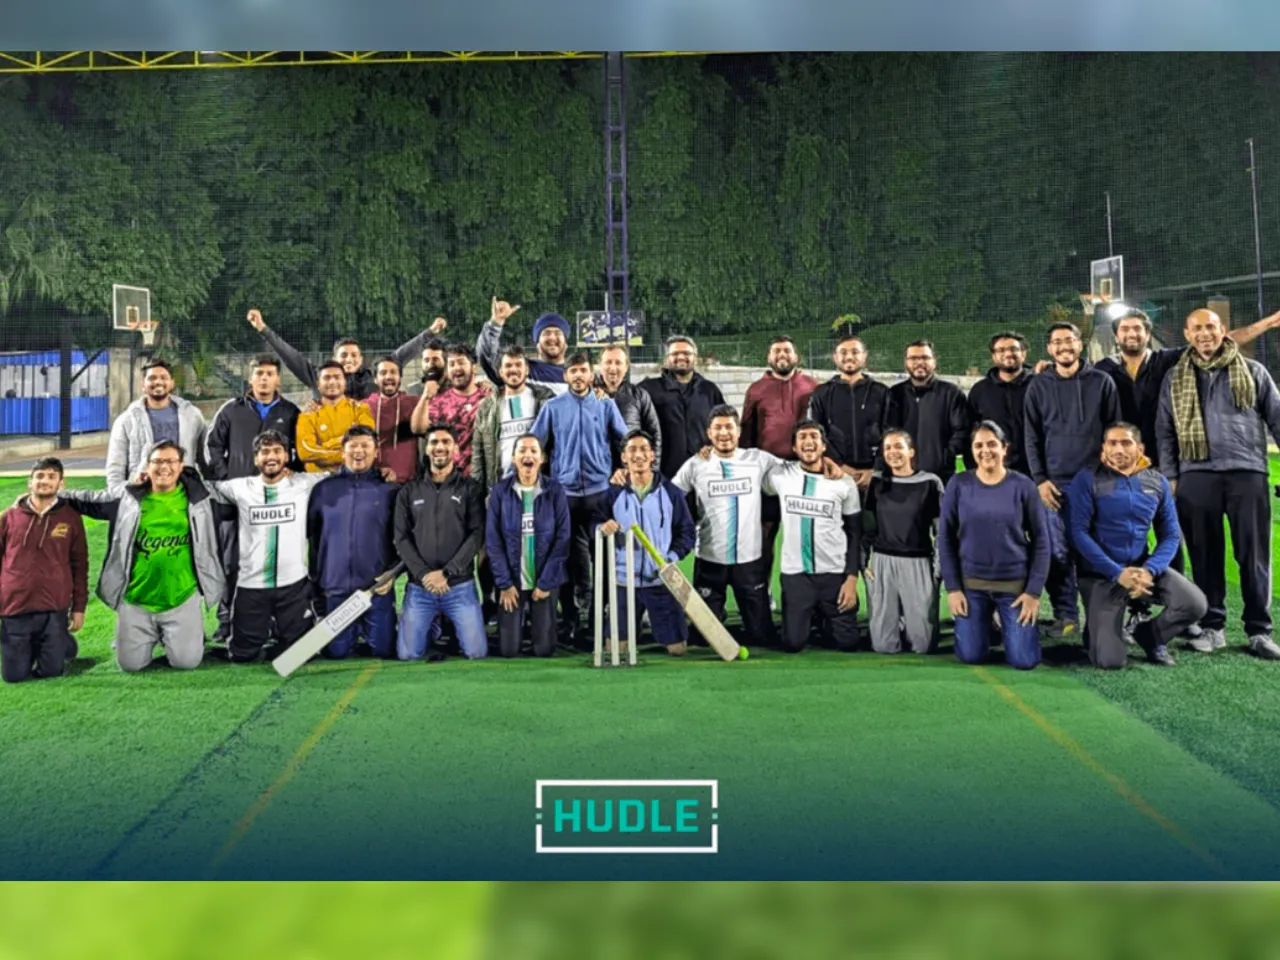 Sportstech startup Hudle raises Rs 7Cr in a pre-Series A round led by IPV, others